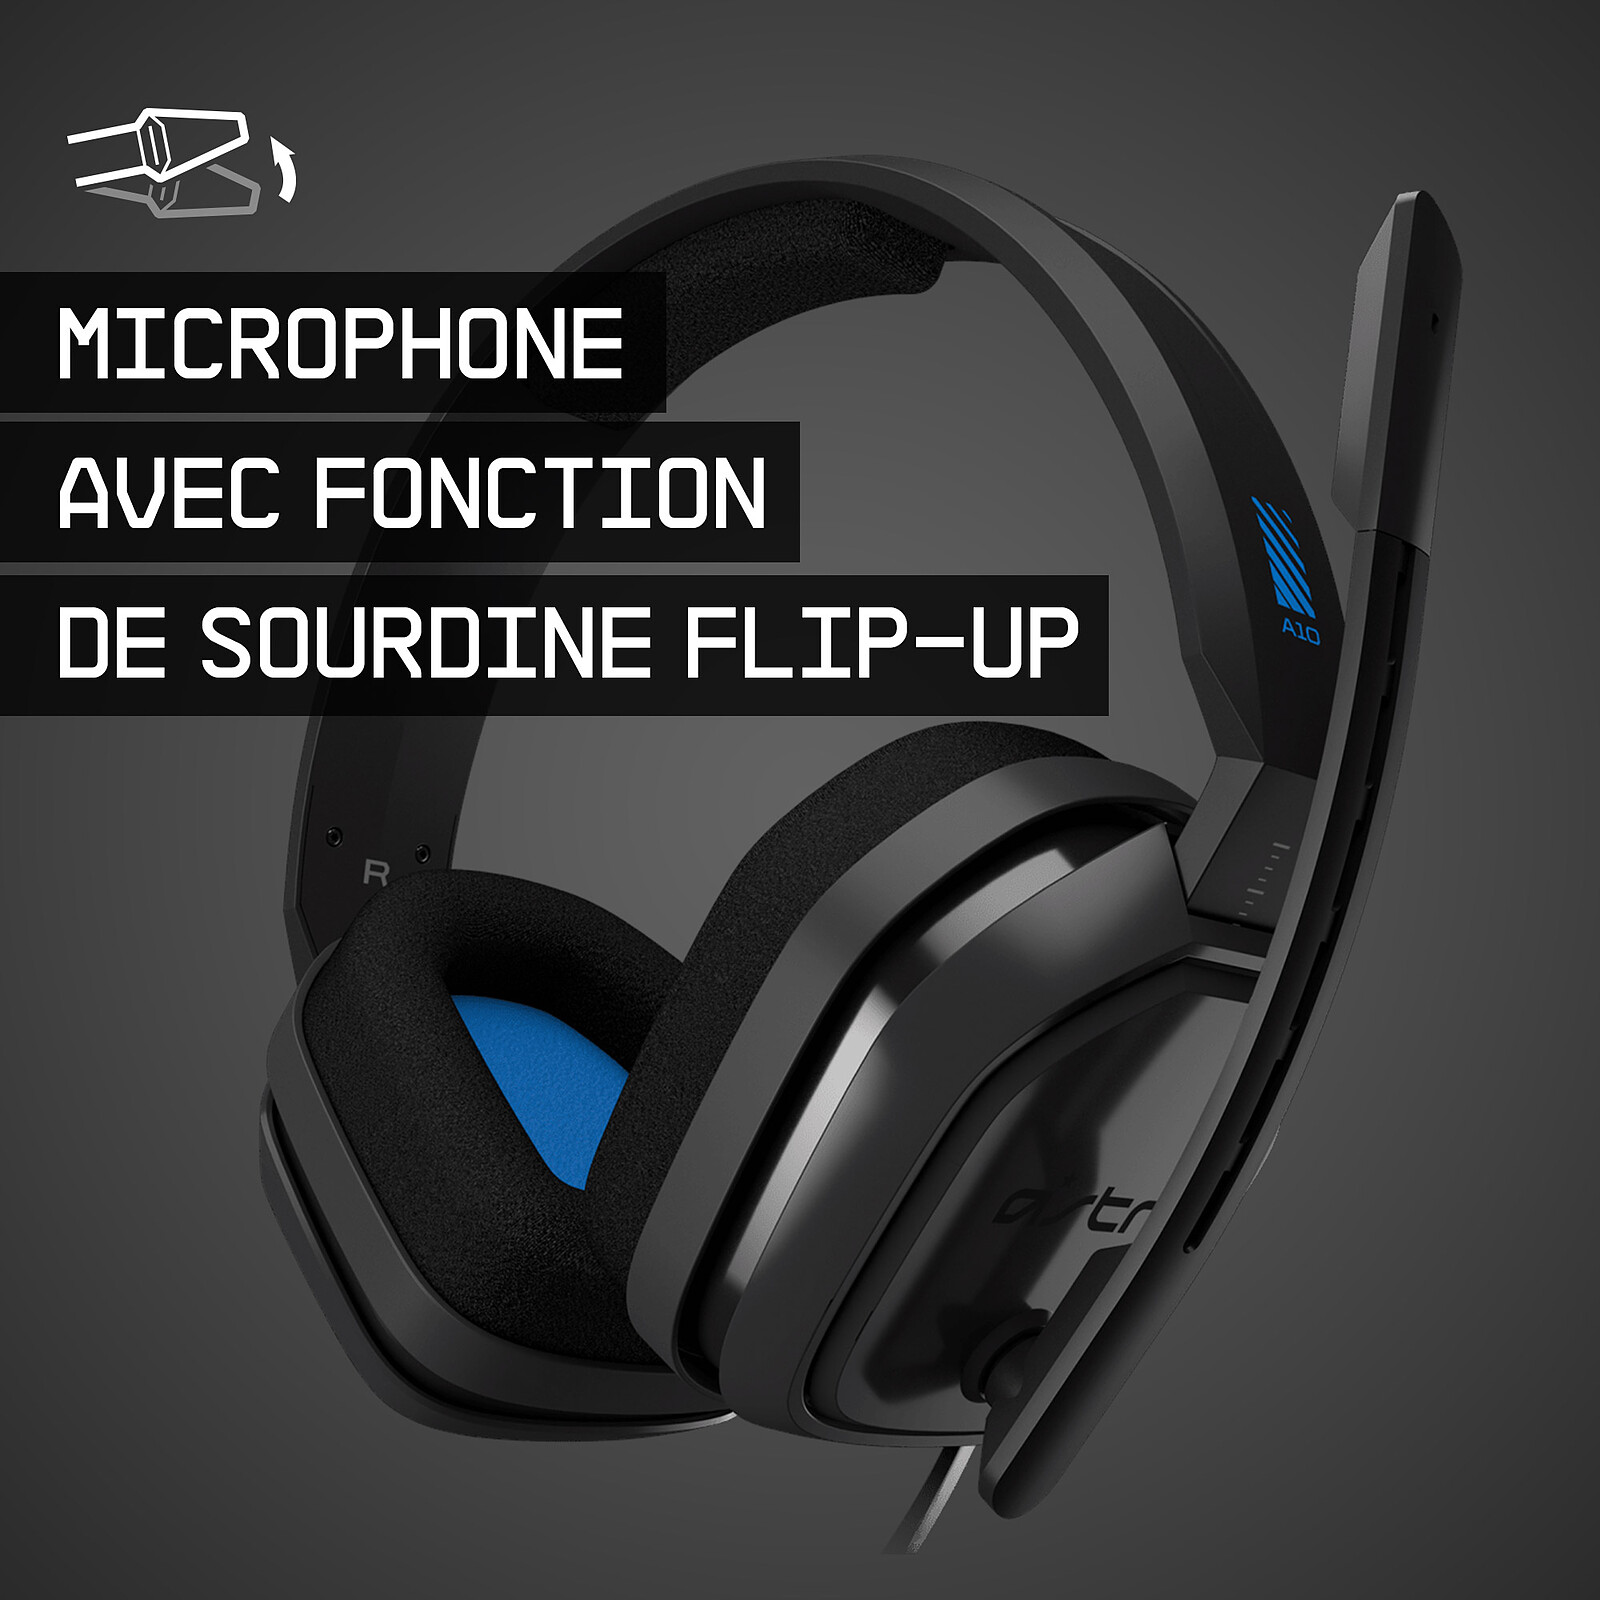 Auriculares Gamer Con Microfono Ps4 Xbox Play 4 Switch